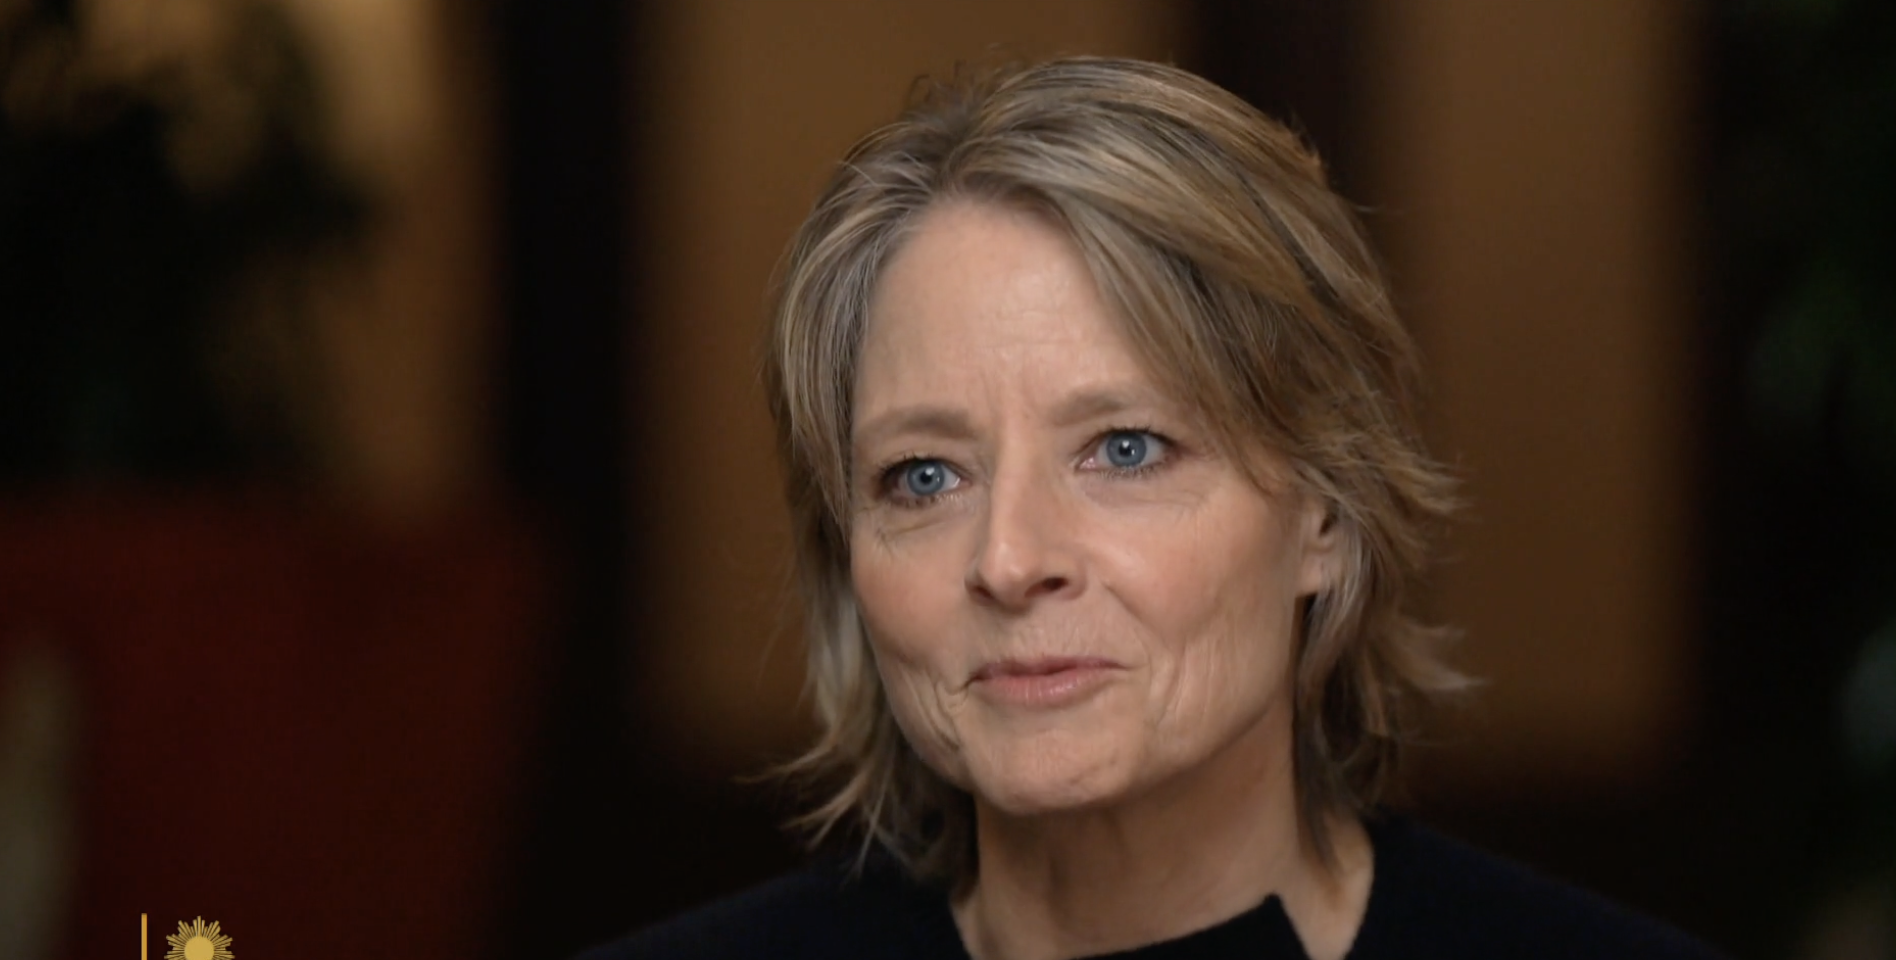 Jodie Foster Says Gen Z is ‘Really Annoying, Especially in the Workplace’: They’re Like, ‘Nah, I’m Not Feeling It Today’